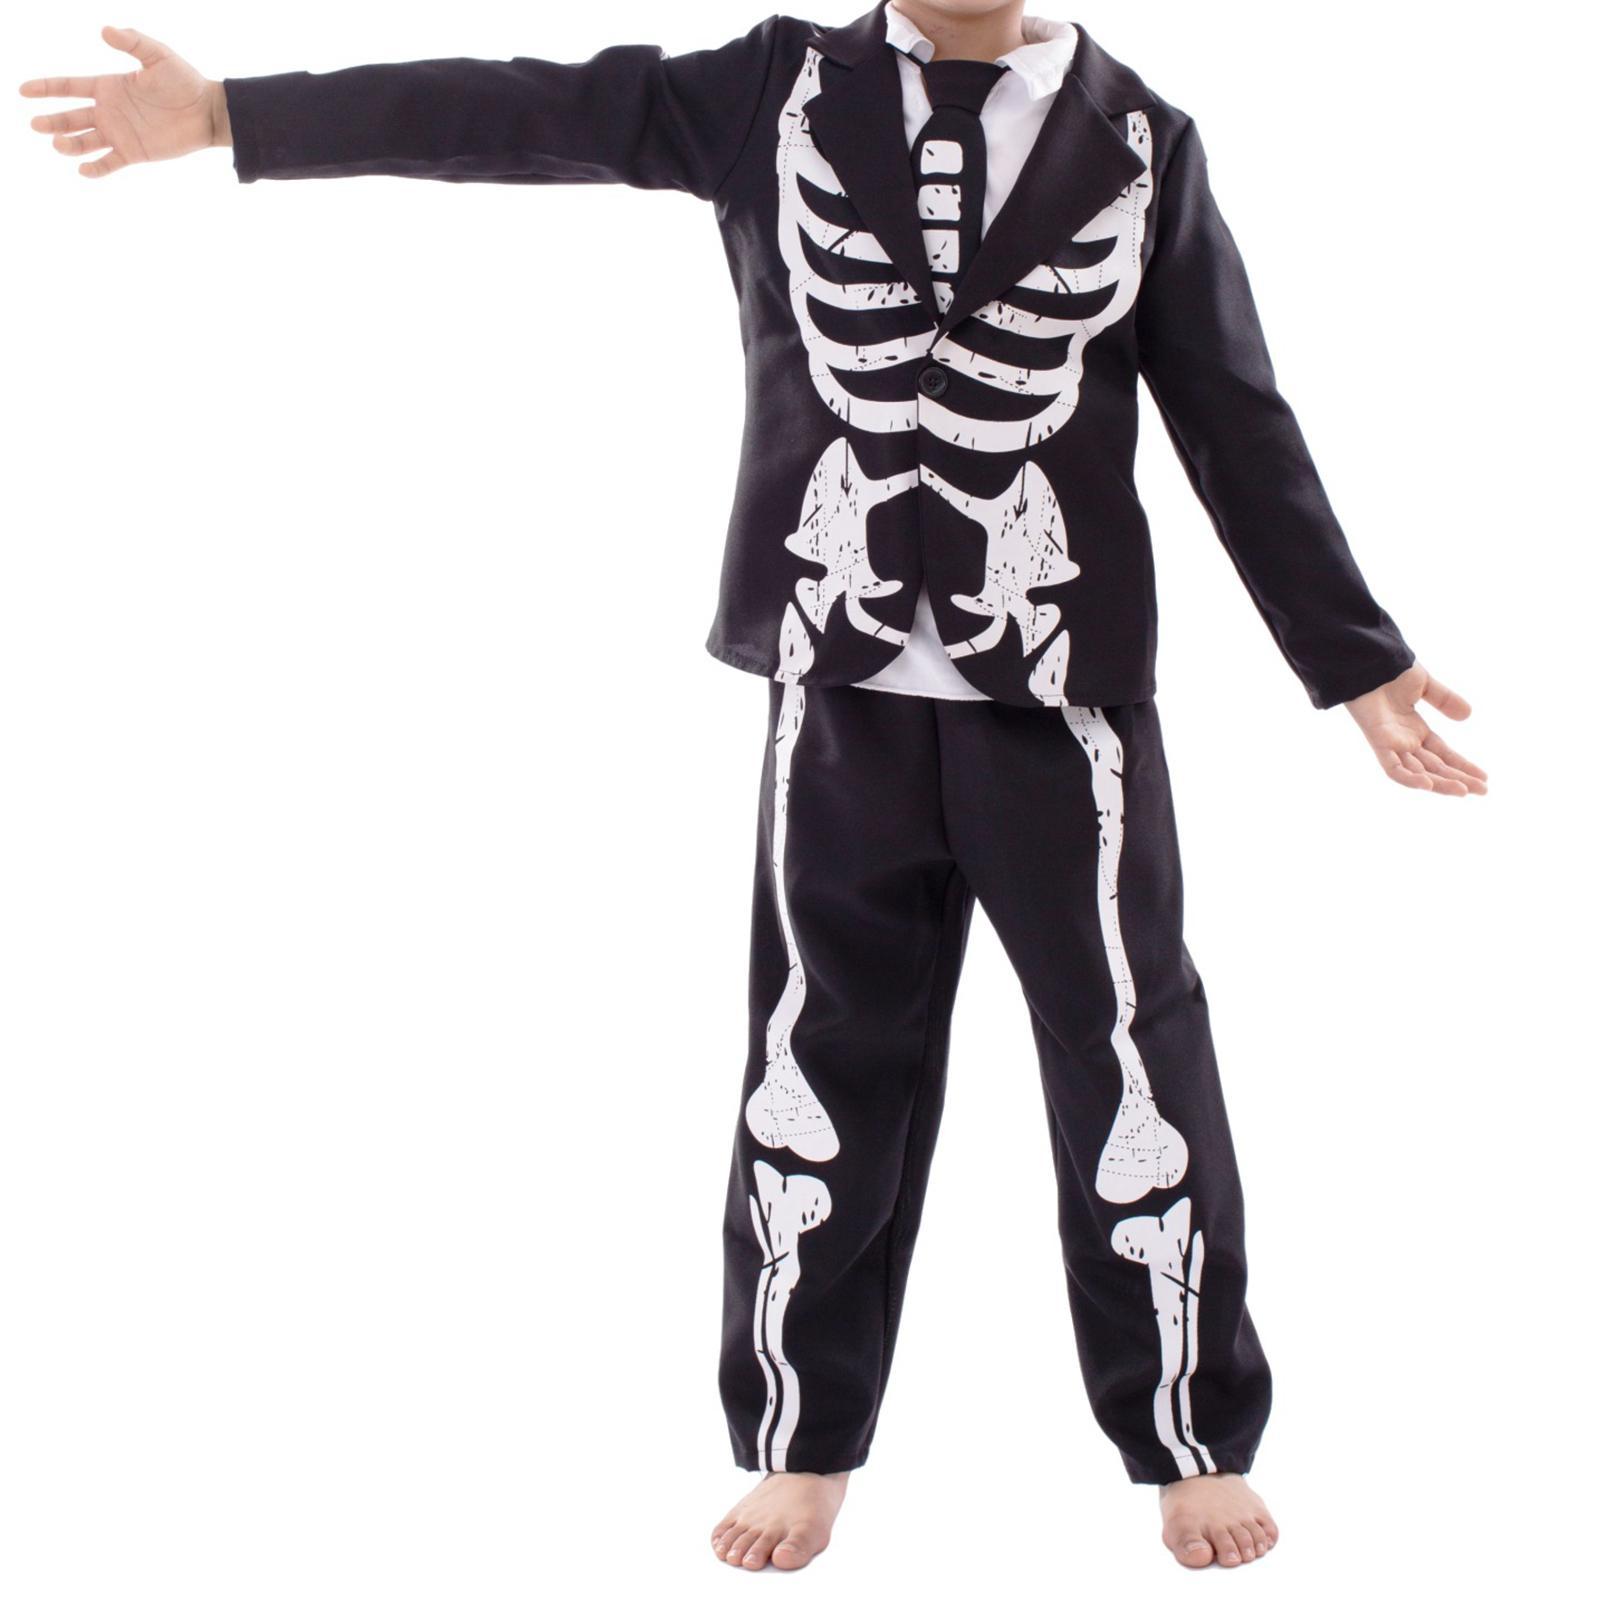 Halloween Skeleton Costume Kids Dress Suit Decoration Skull Boys Girls Halloween Skeleton Suit Cosplay Outfit for Party Favor